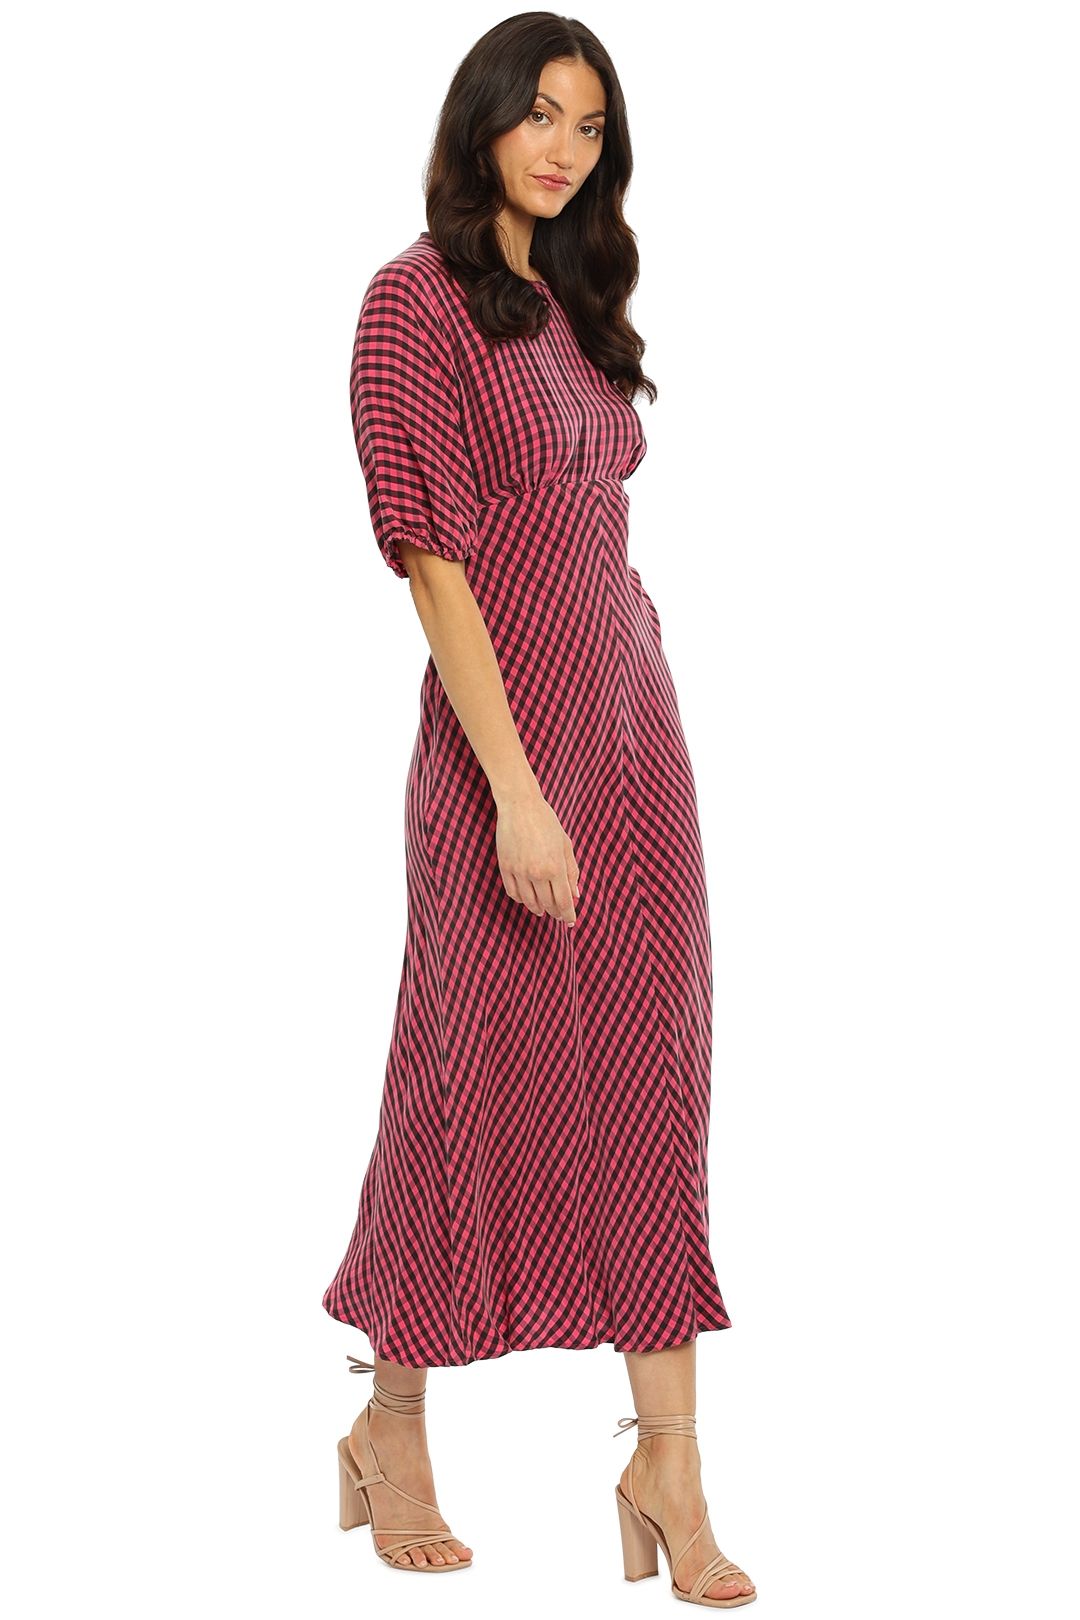 Kate Sylvester Aimee Dress Pink Check